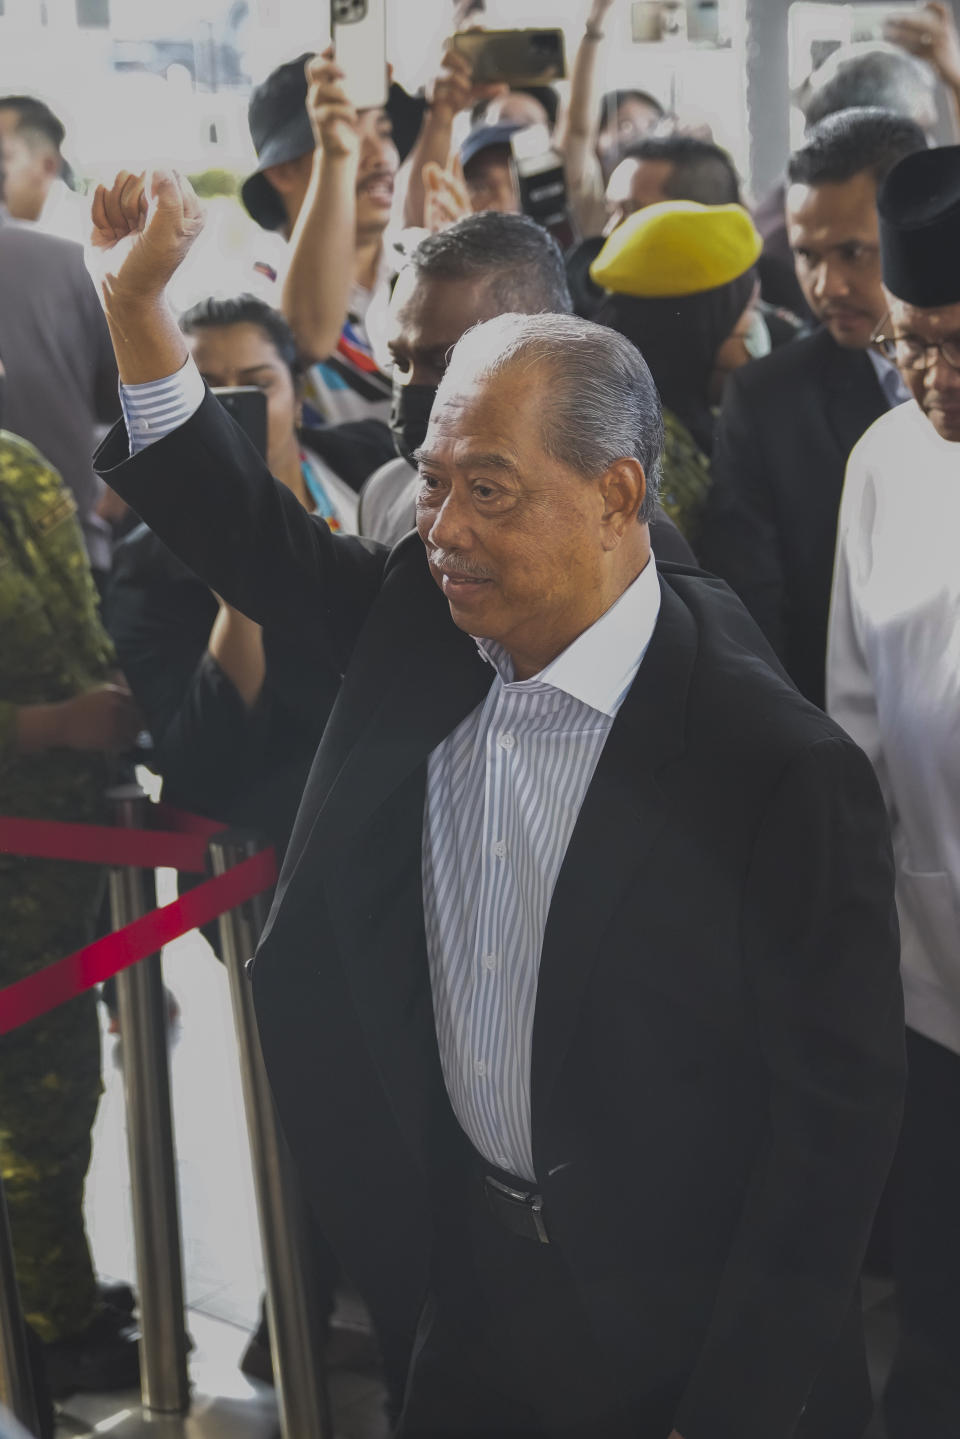 Malaysia's former Prime Minister Muhyiddin Yassin waves as he arrives at courthouse for a corruption charges in Kuala Lumpur, Malaysia, Friday, March 10, 2023. Muhyiddin, who led Malaysia from March 2020 until August 2021, will be the country's second leader to be indicted after leaving office. (AP Photo/Vincent Thian)